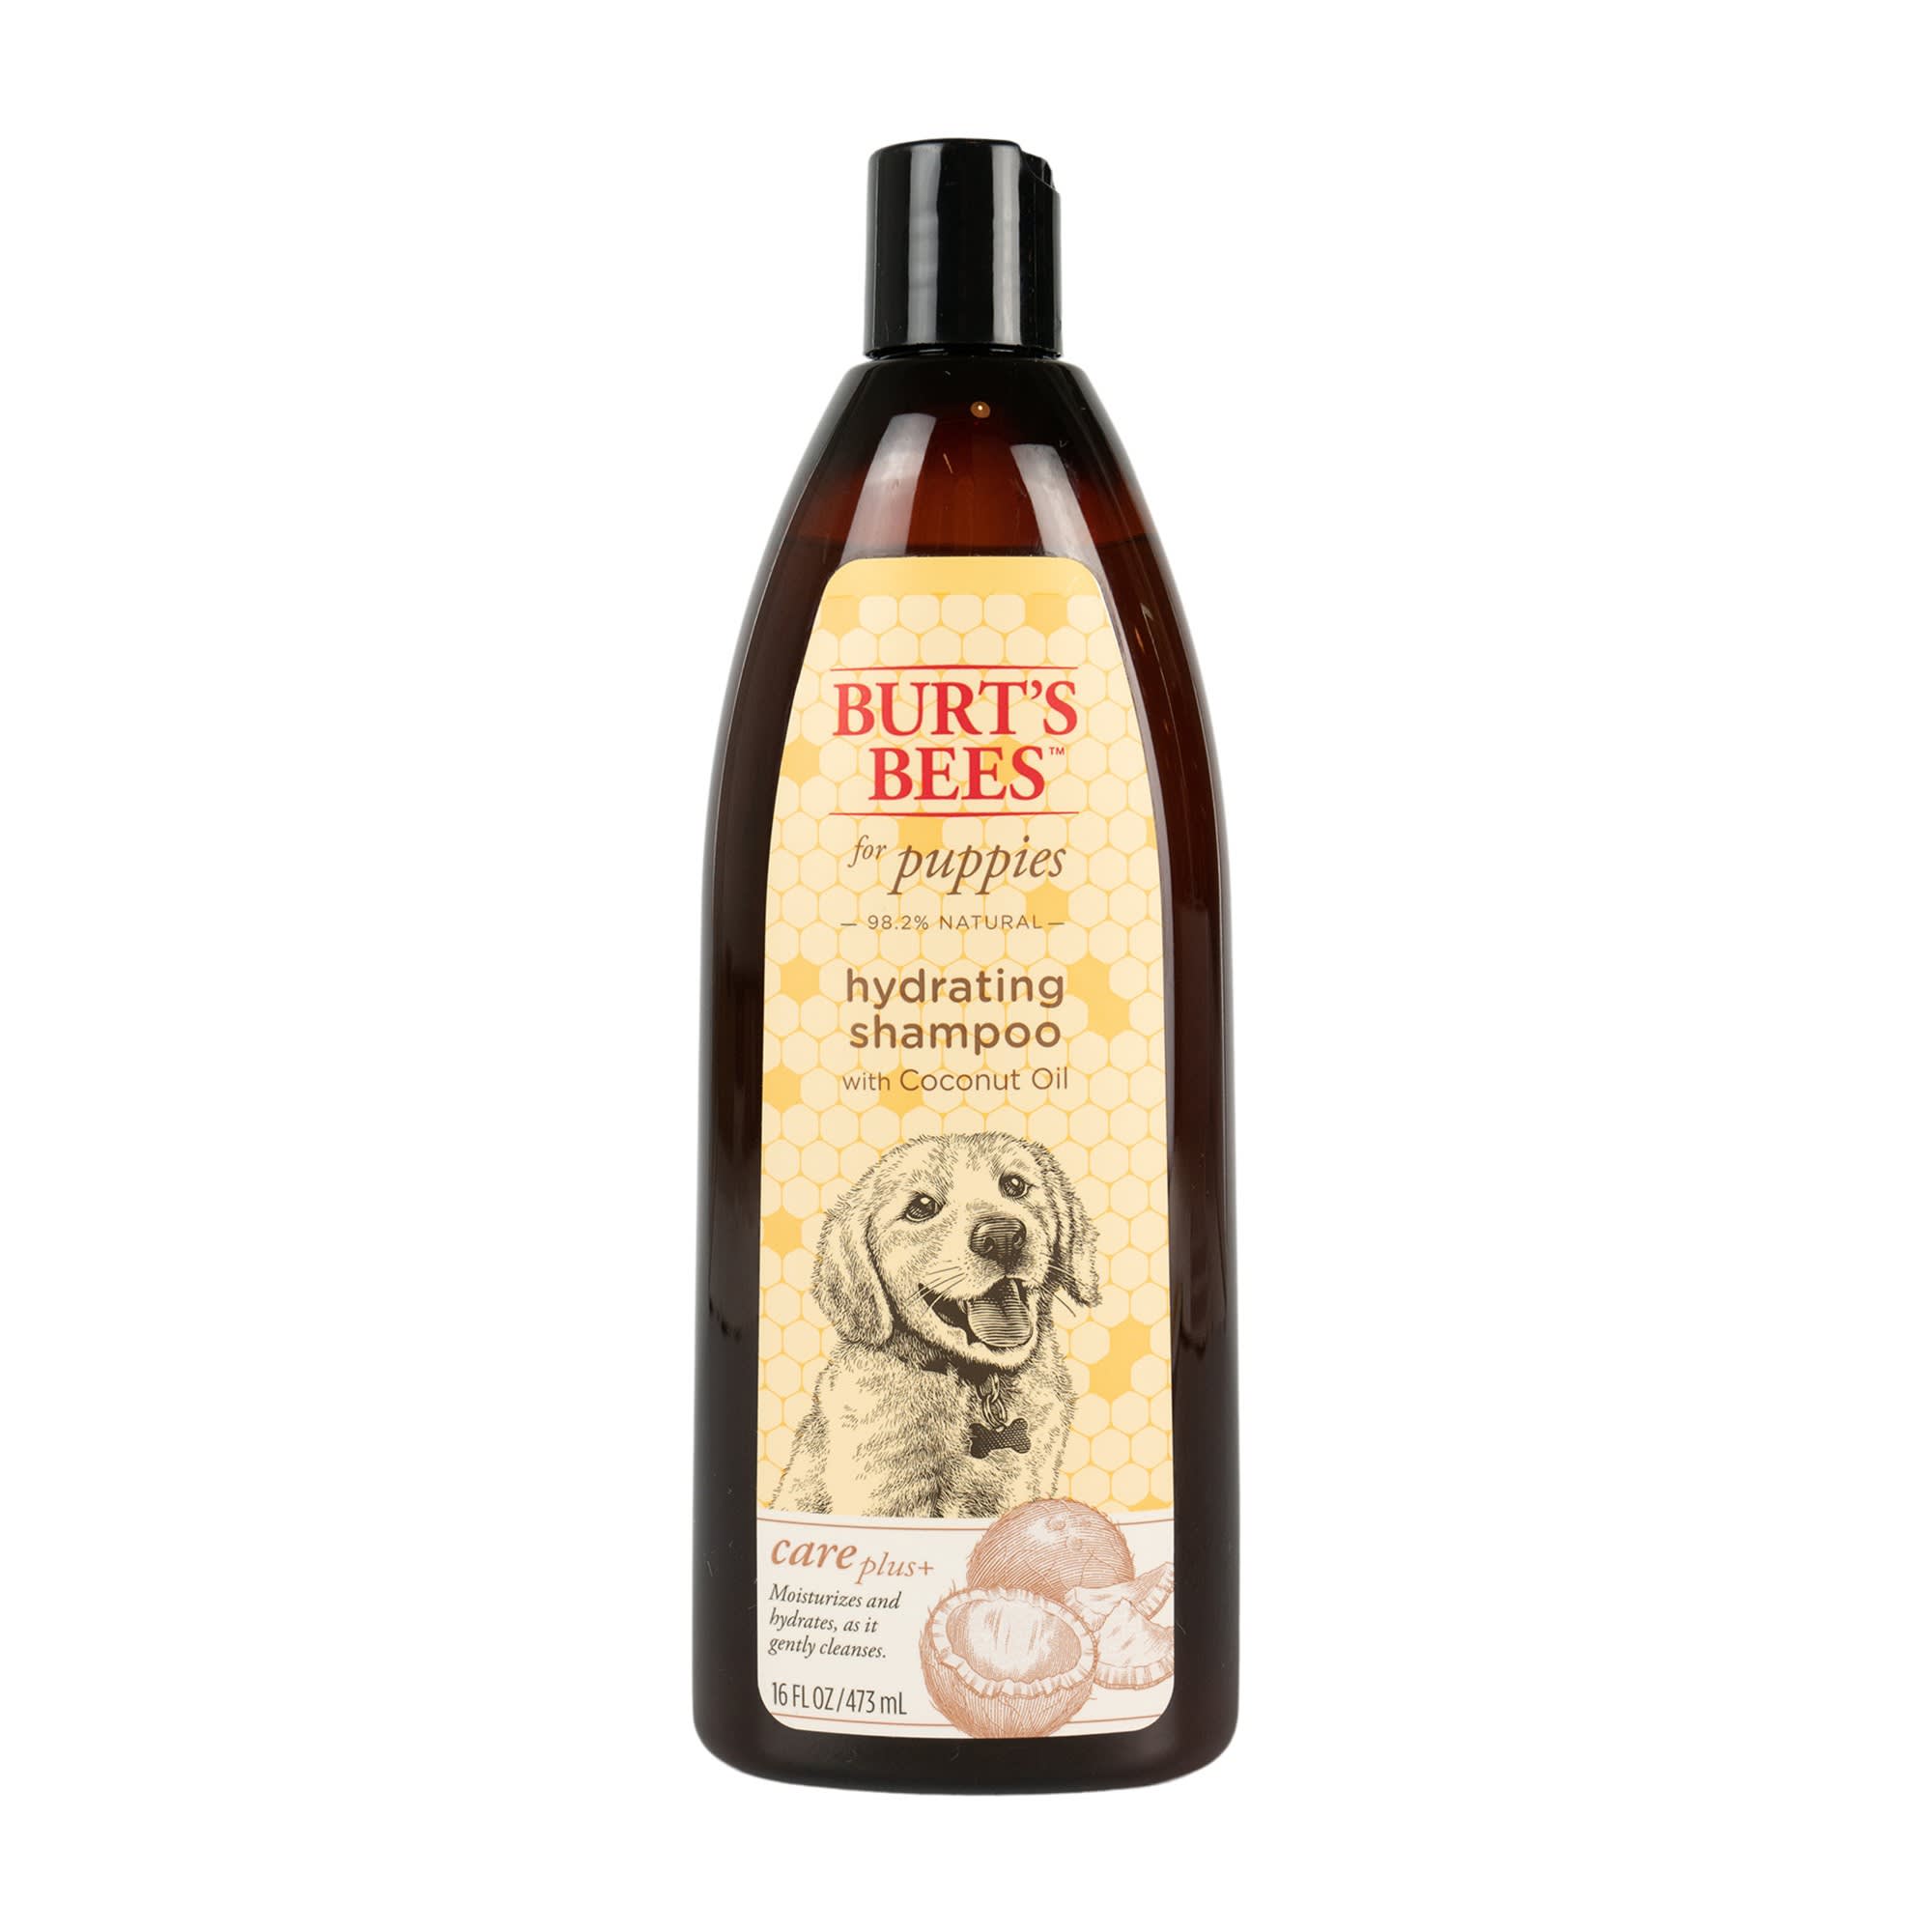 Burts Bees Care Plus+ Hydrating + Coconut Oil for Dogs  16oz